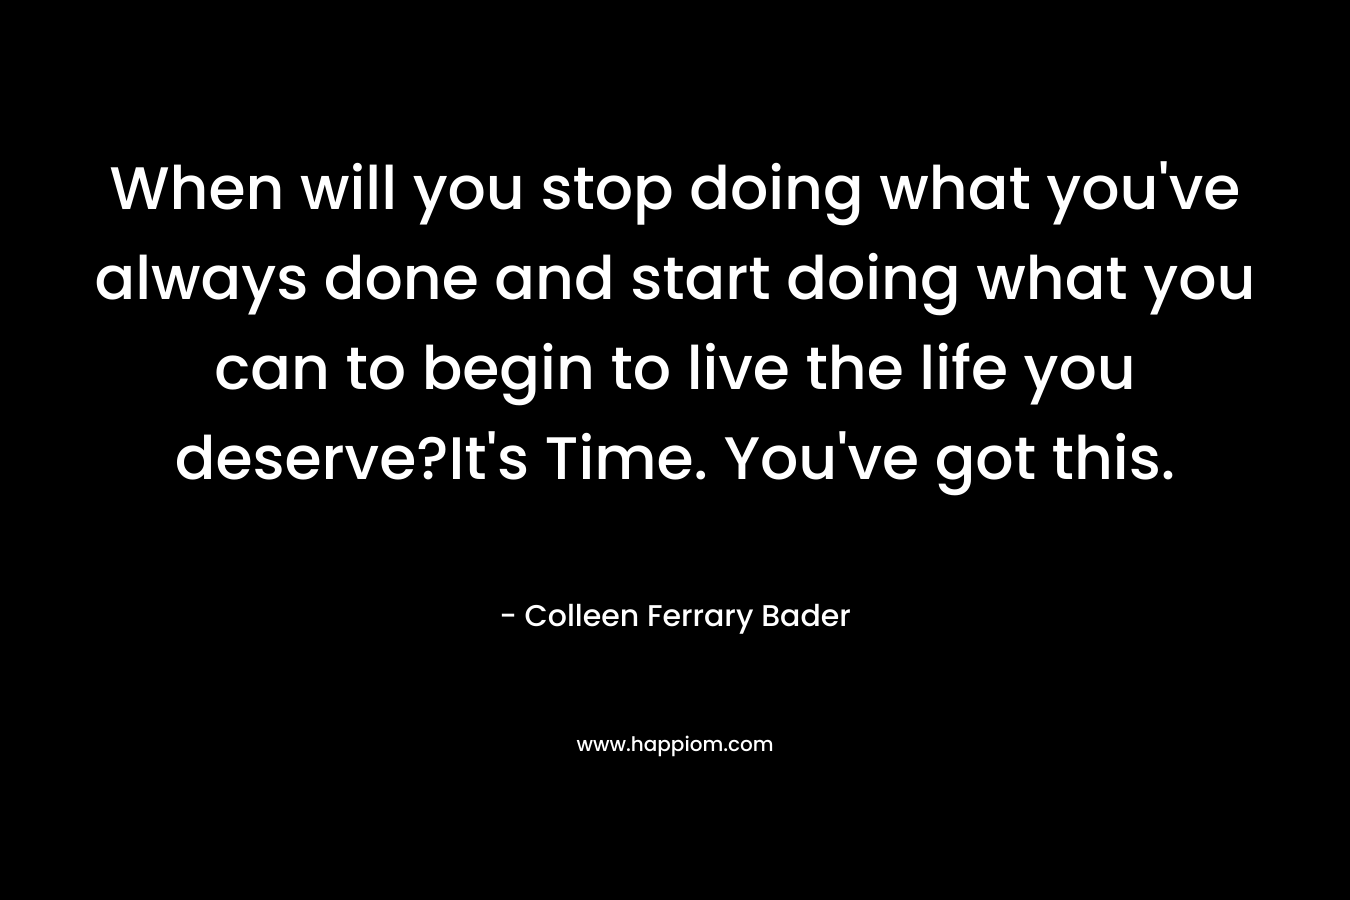 When will you stop doing what you’ve always done and start doing what you can to begin to live the life you deserve?It’s Time. You’ve got this. – Colleen Ferrary Bader